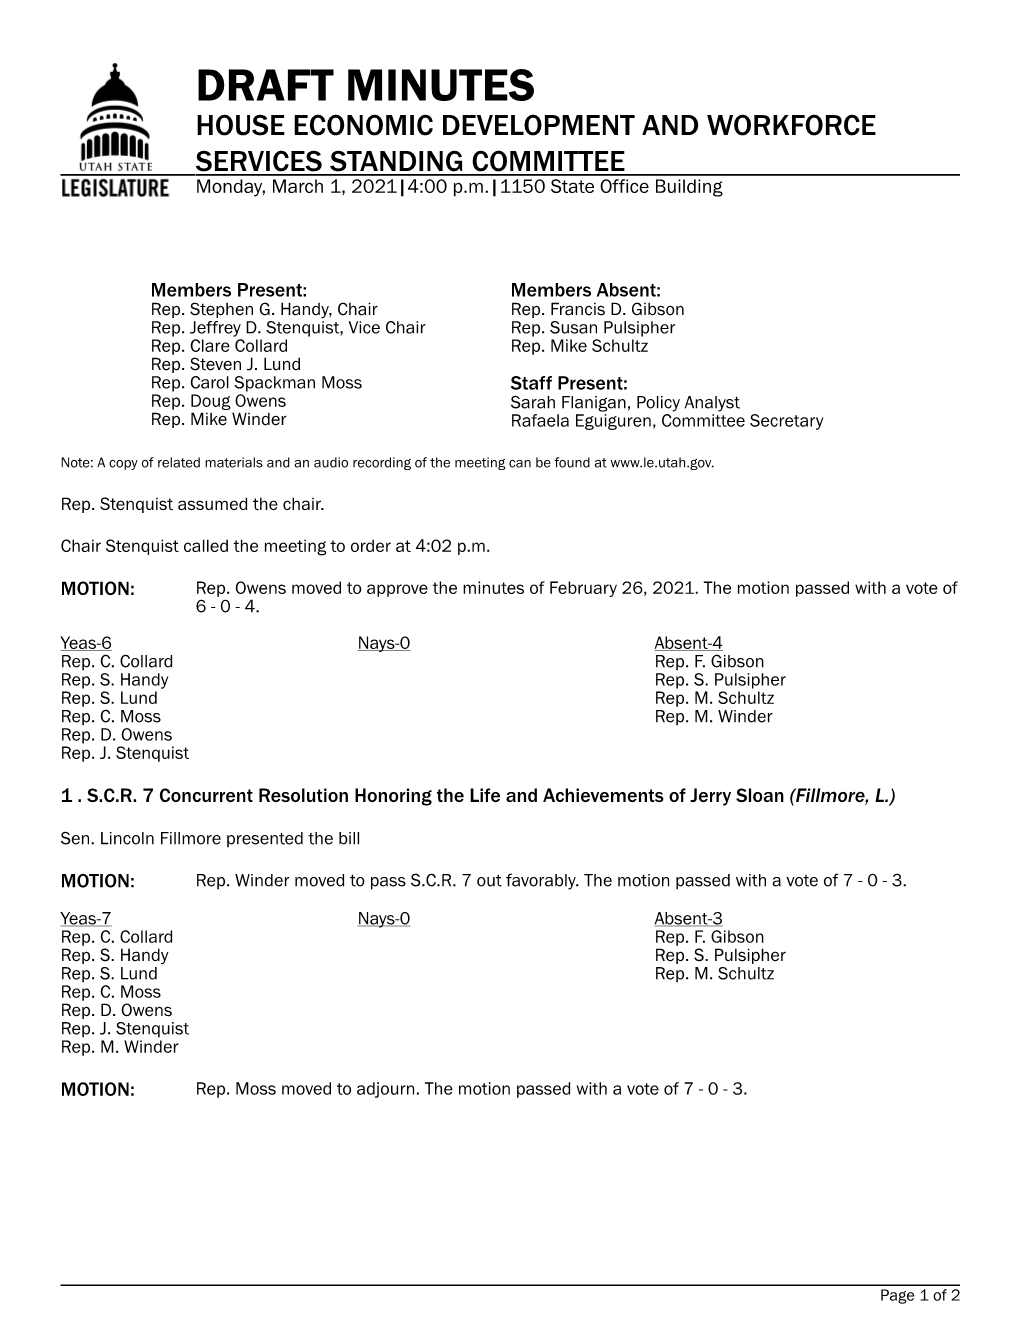 DRAFT MINUTES HOUSE ECONOMIC DEVELOPMENT and WORKFORCE SERVICES STANDING COMMITTEE Monday, March 1, 2021|4:00 P.M.|1150 State Office Building